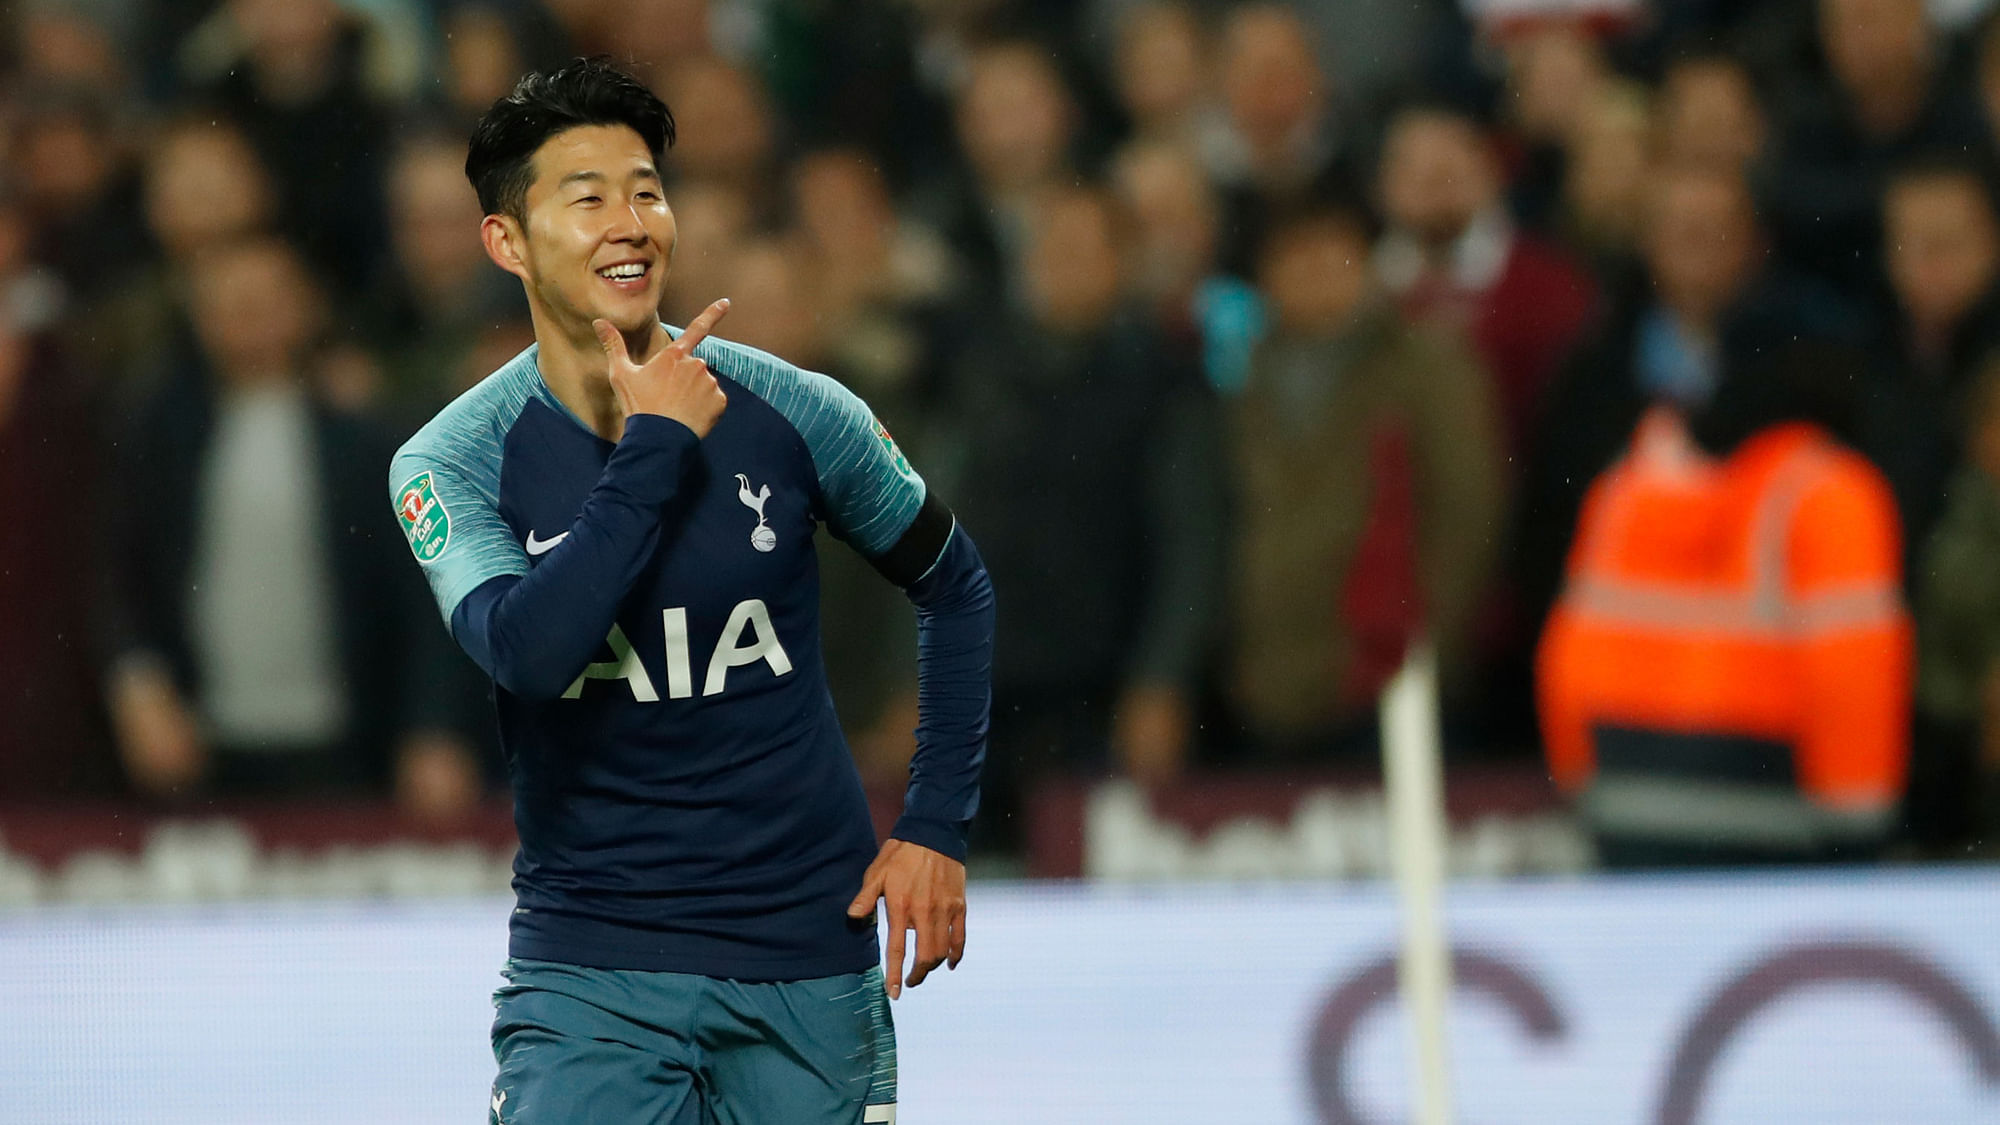 Son Heung-min burst out of a 19-game goal drought to help Tottenham into the English League Cup quarter-finals.